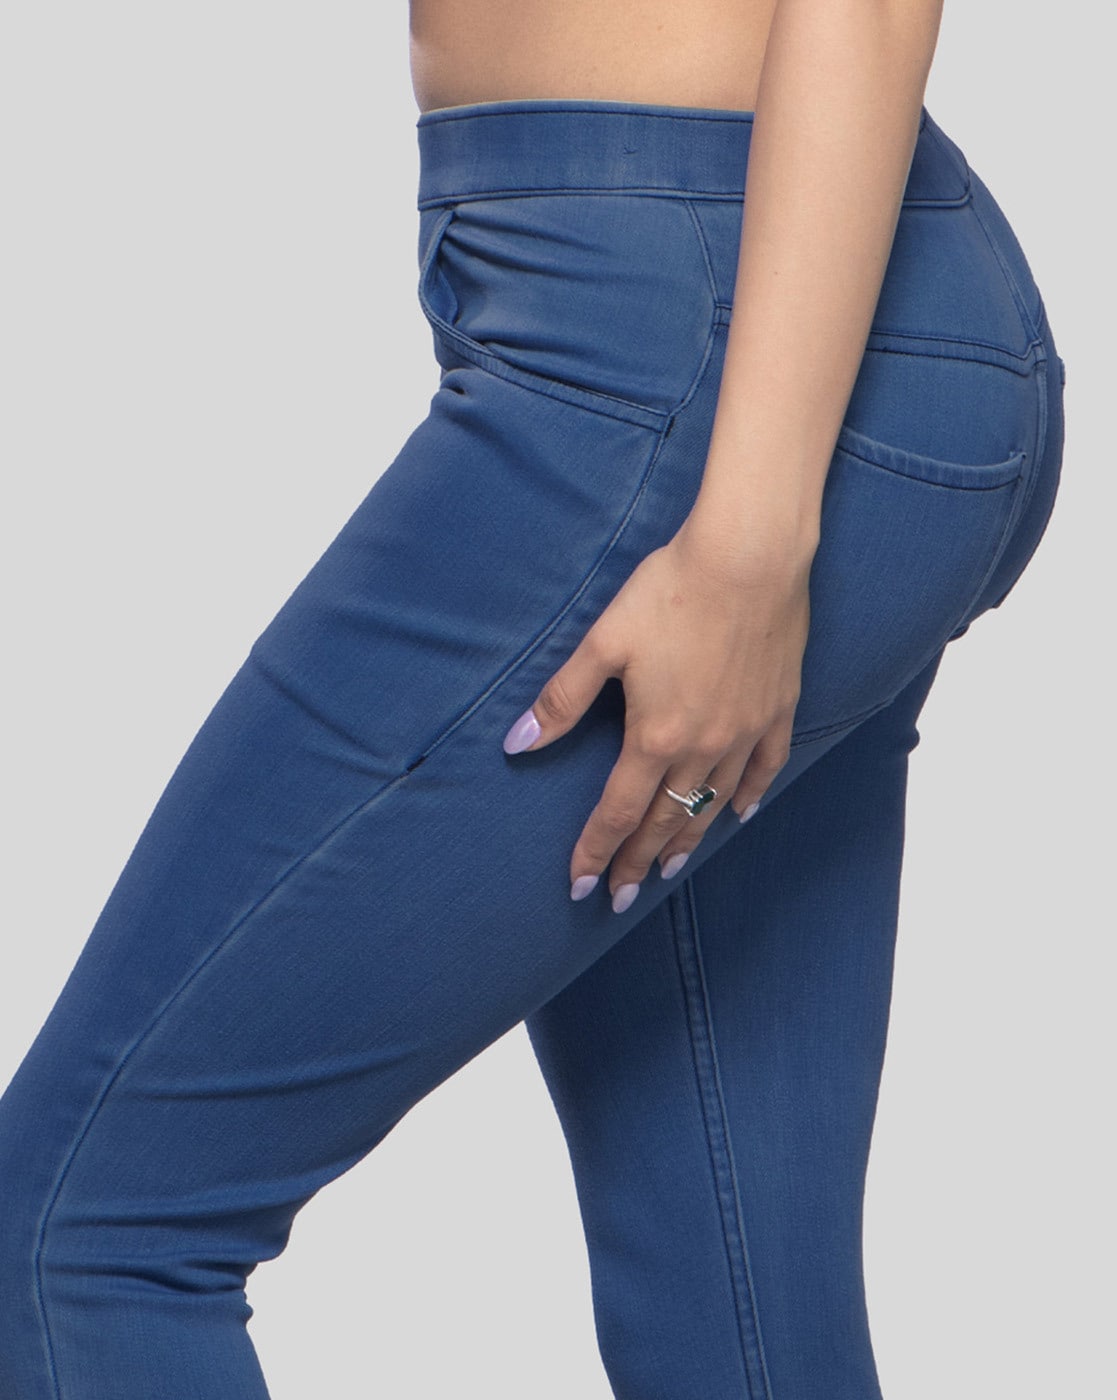 Buy Navy Blue Jeans & Jeggings for Women by Lyra Online